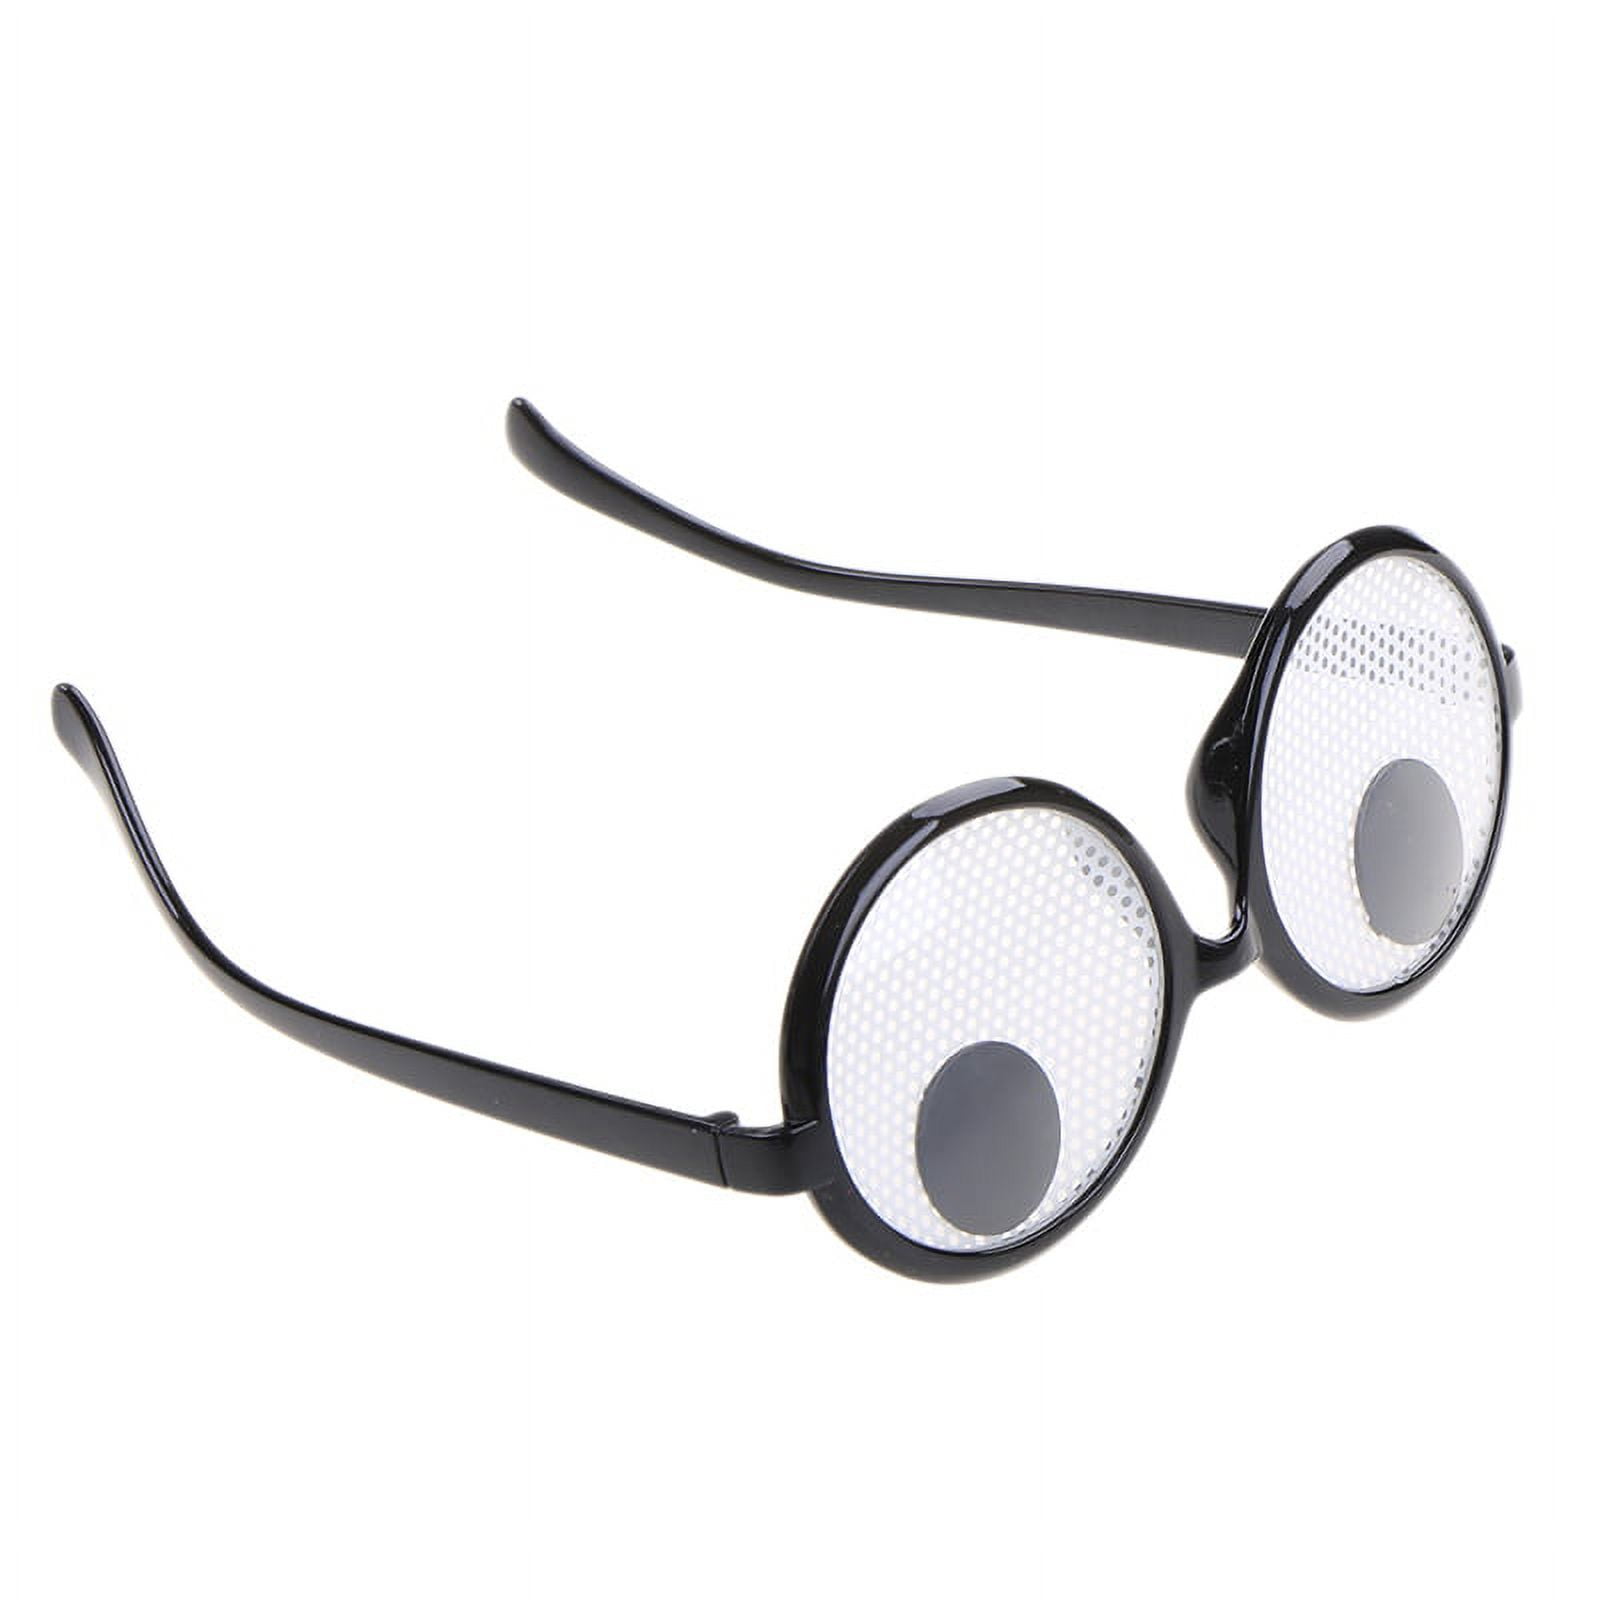 Googly Eyes Glasses Funny Costume Glasses Wiggle Eyes Glasses Novelty  Shades Funny Glasses Accessories For Party